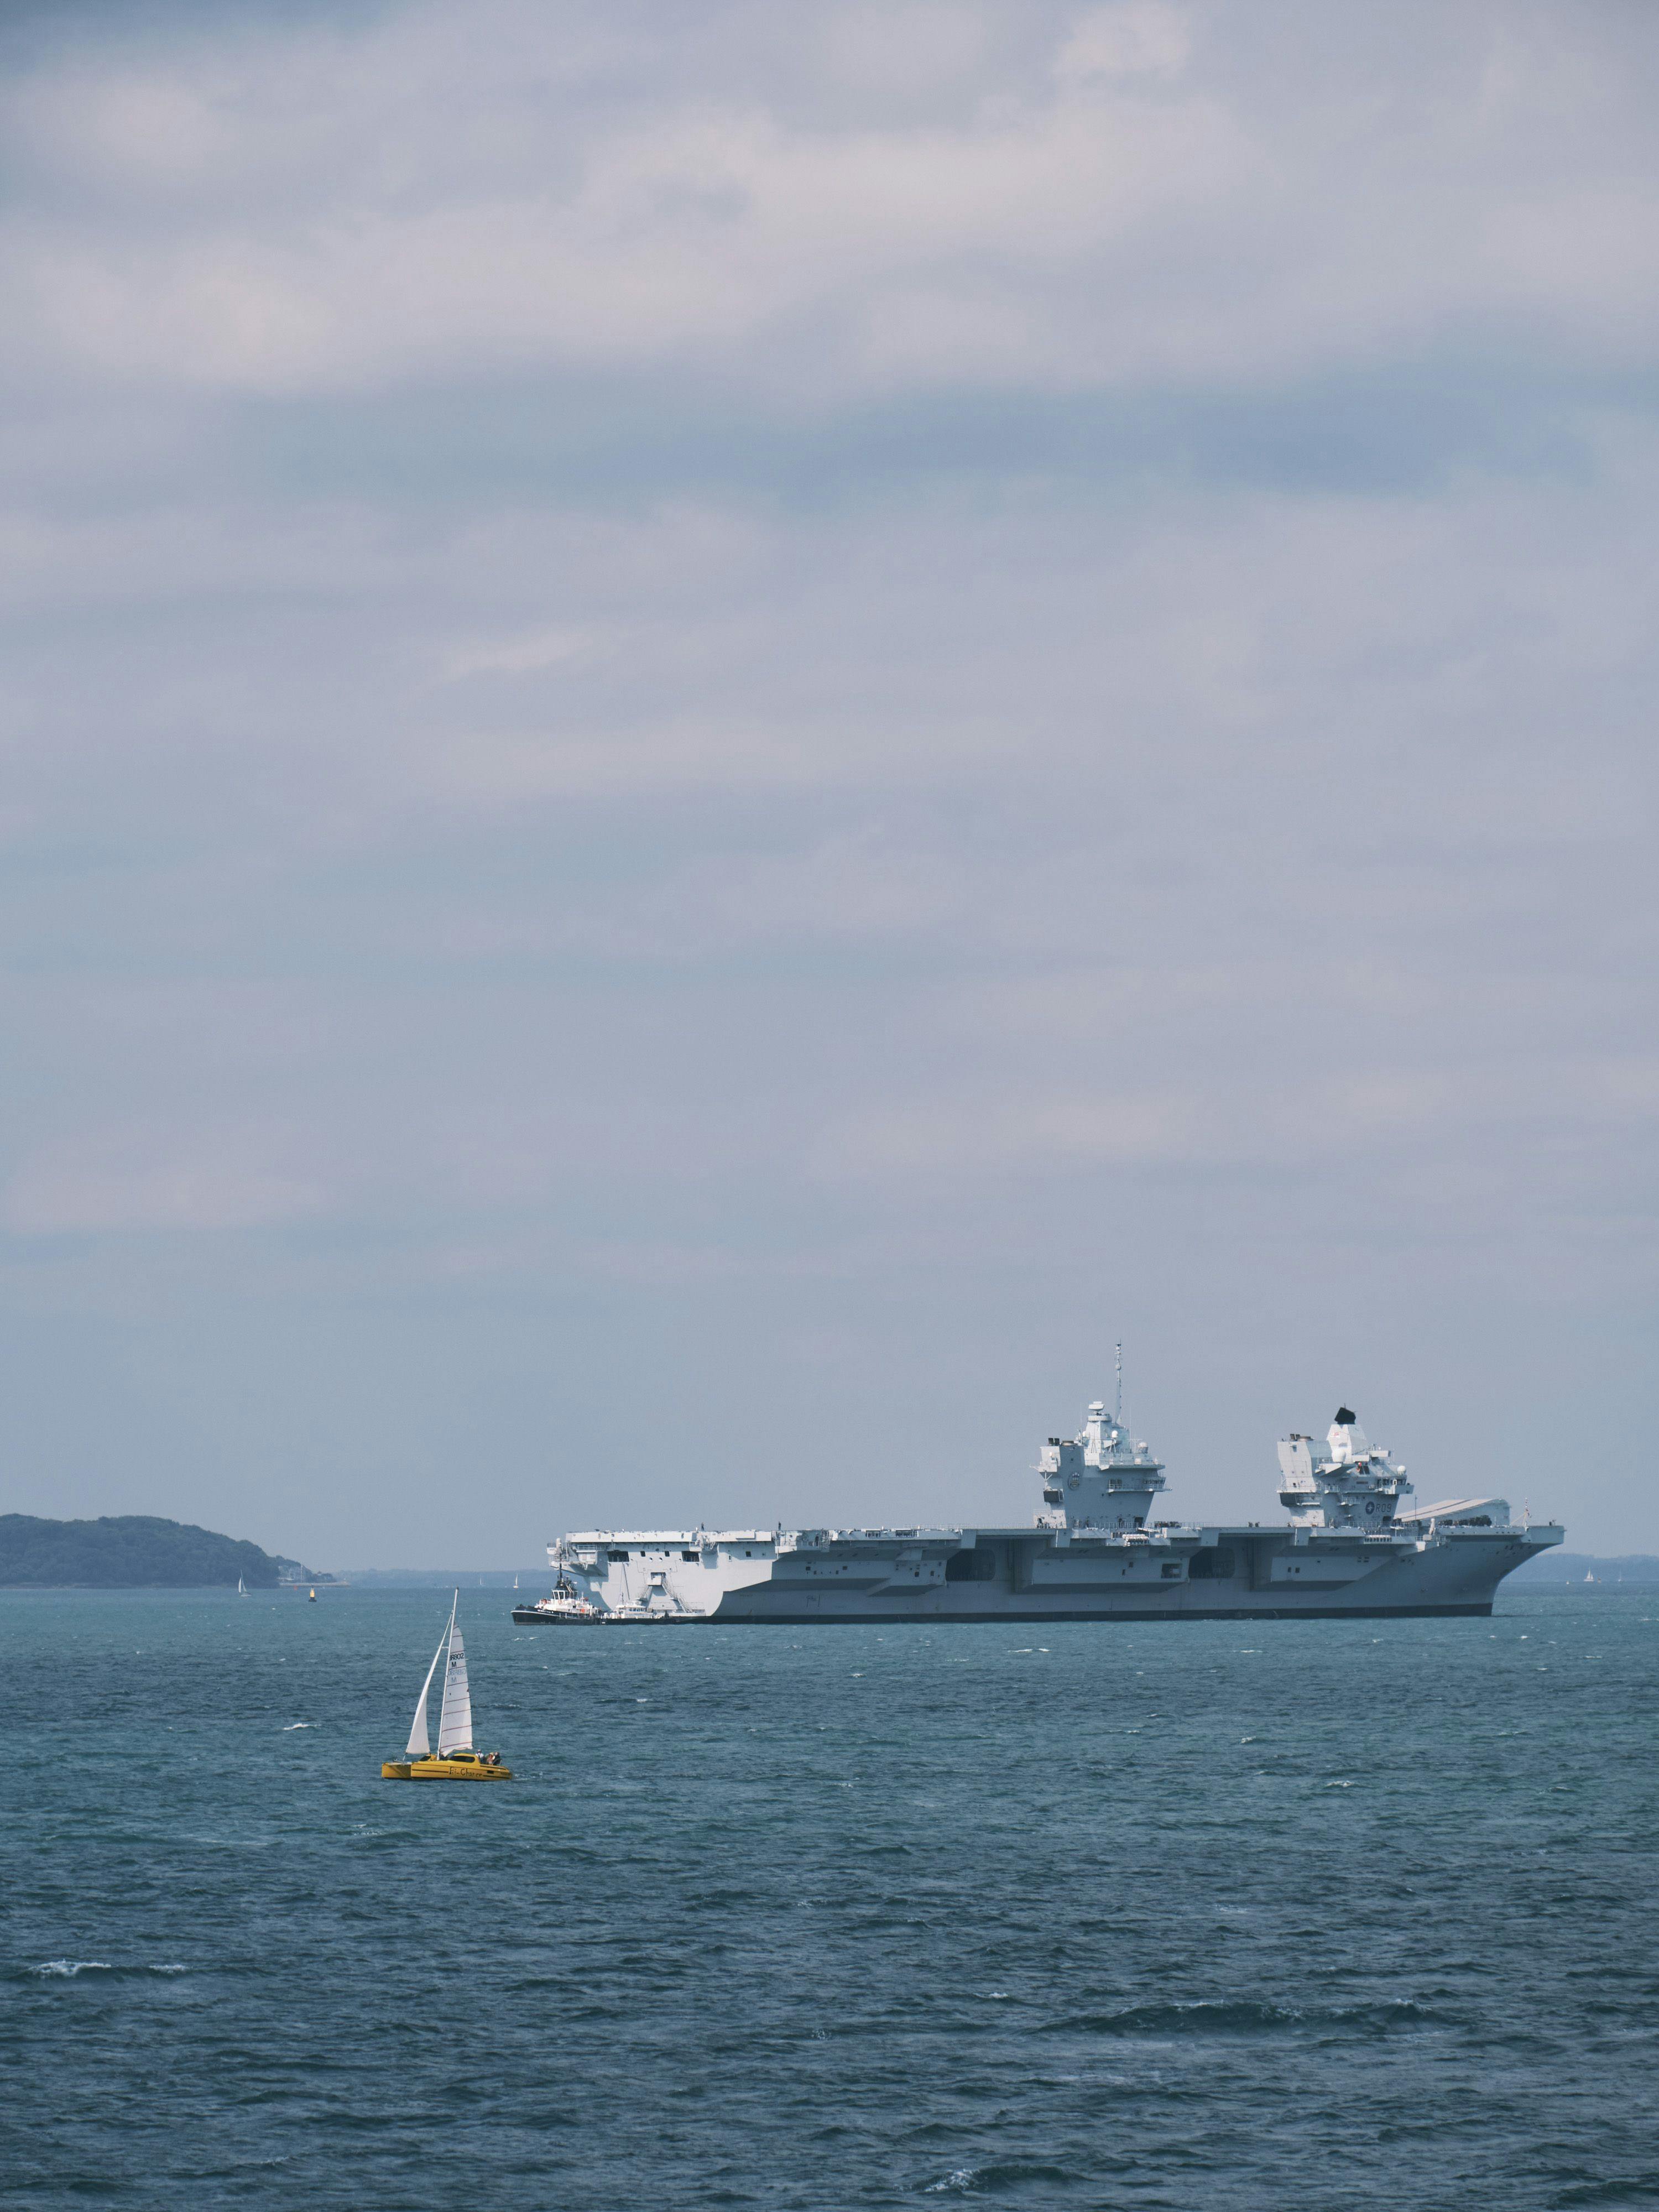 A small sail boat sails past an aircraft carrier